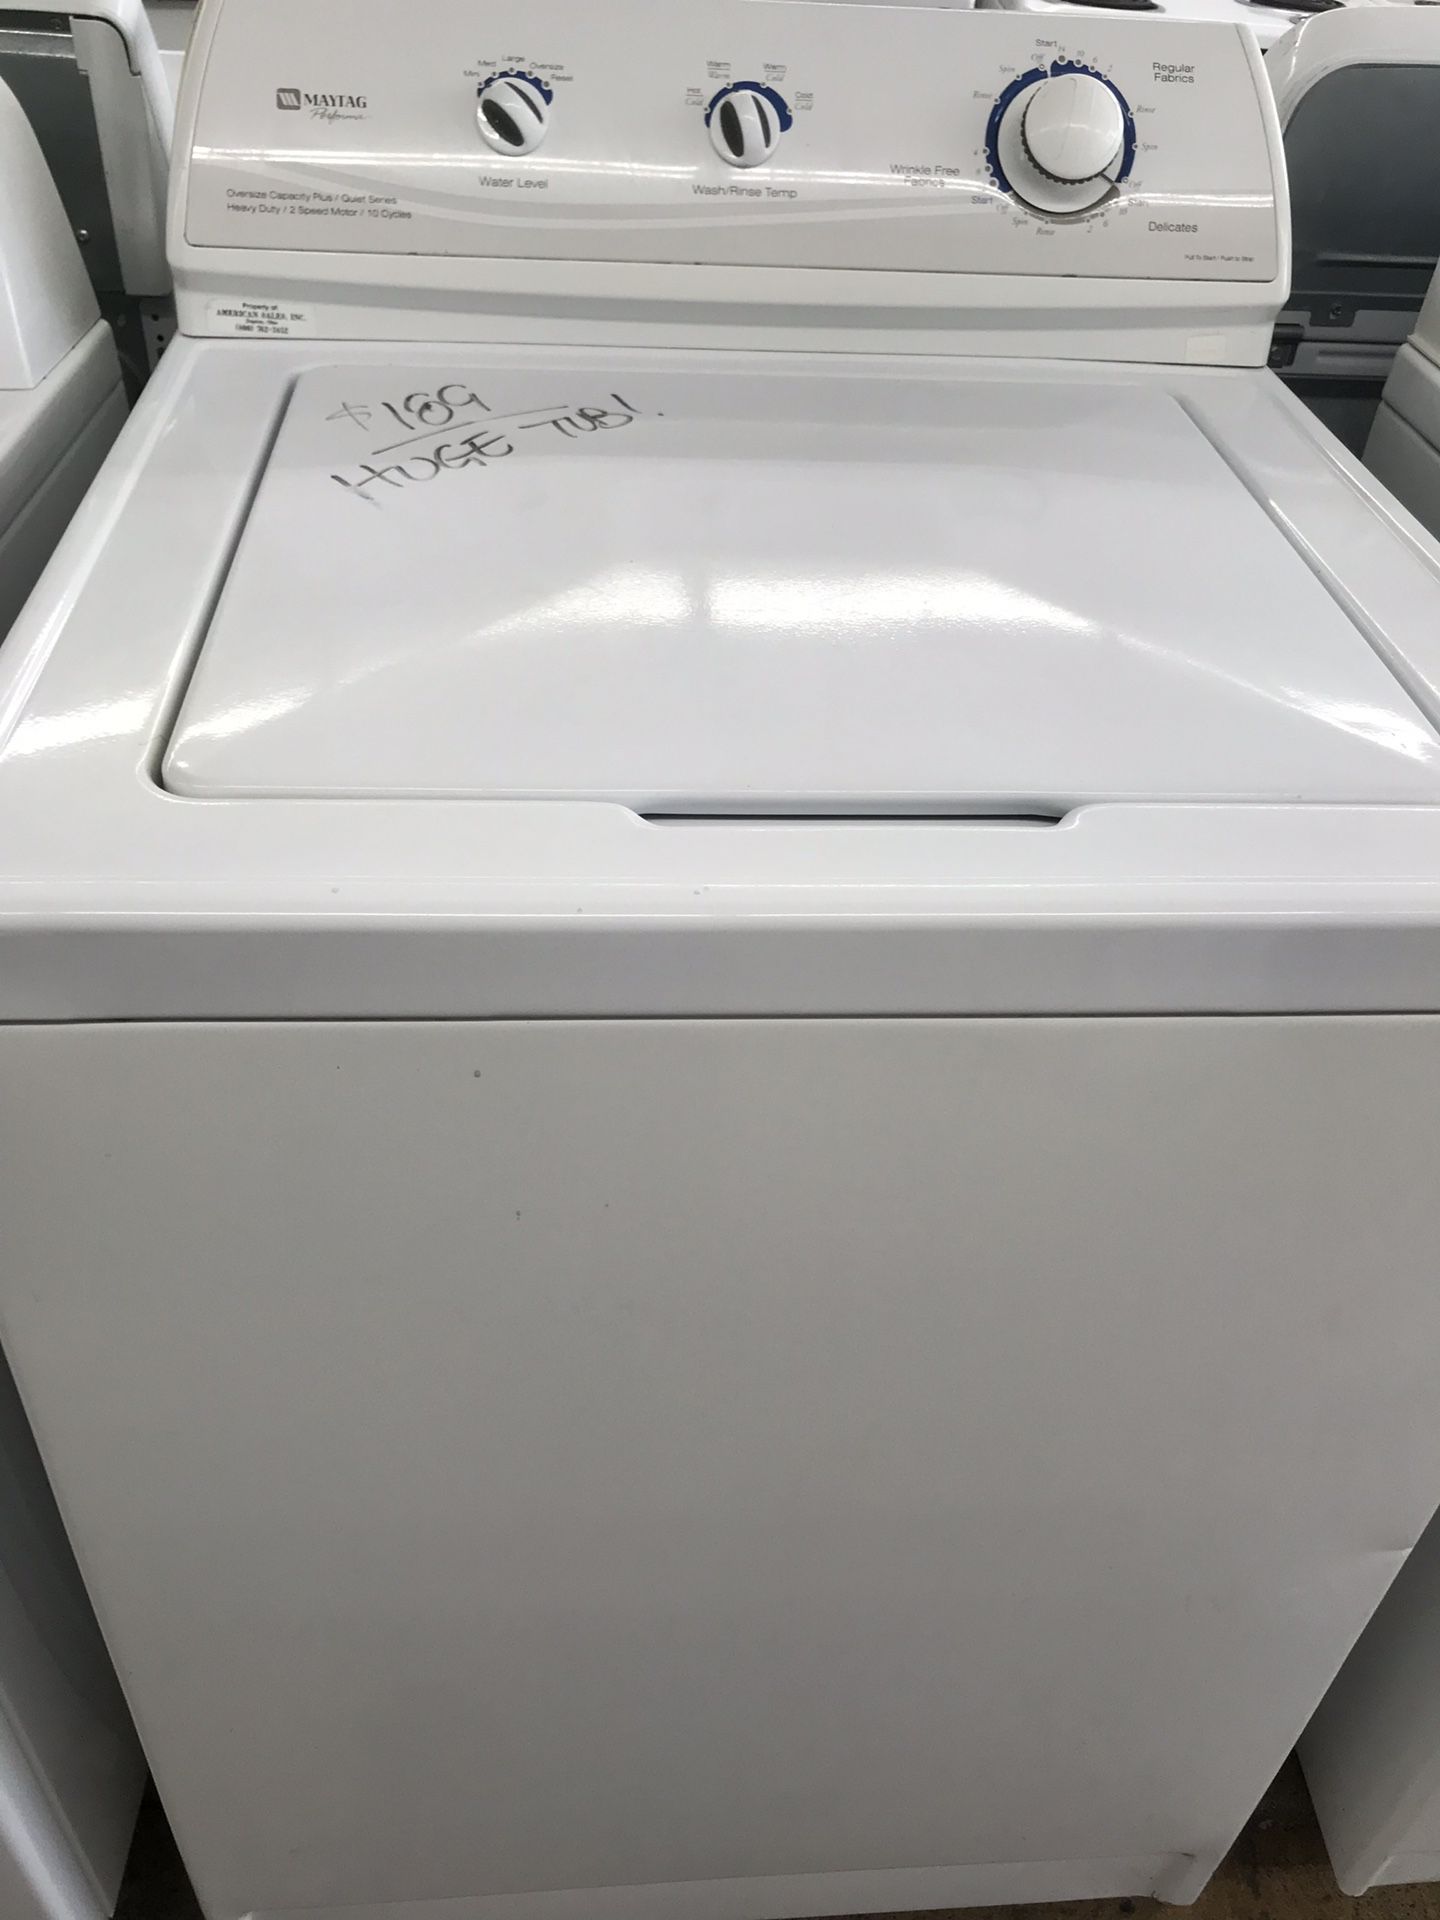 Maytag Performa HUGE Tub Washing Machine! Guaranteed 30 Days! We Can Deliver TODAY!